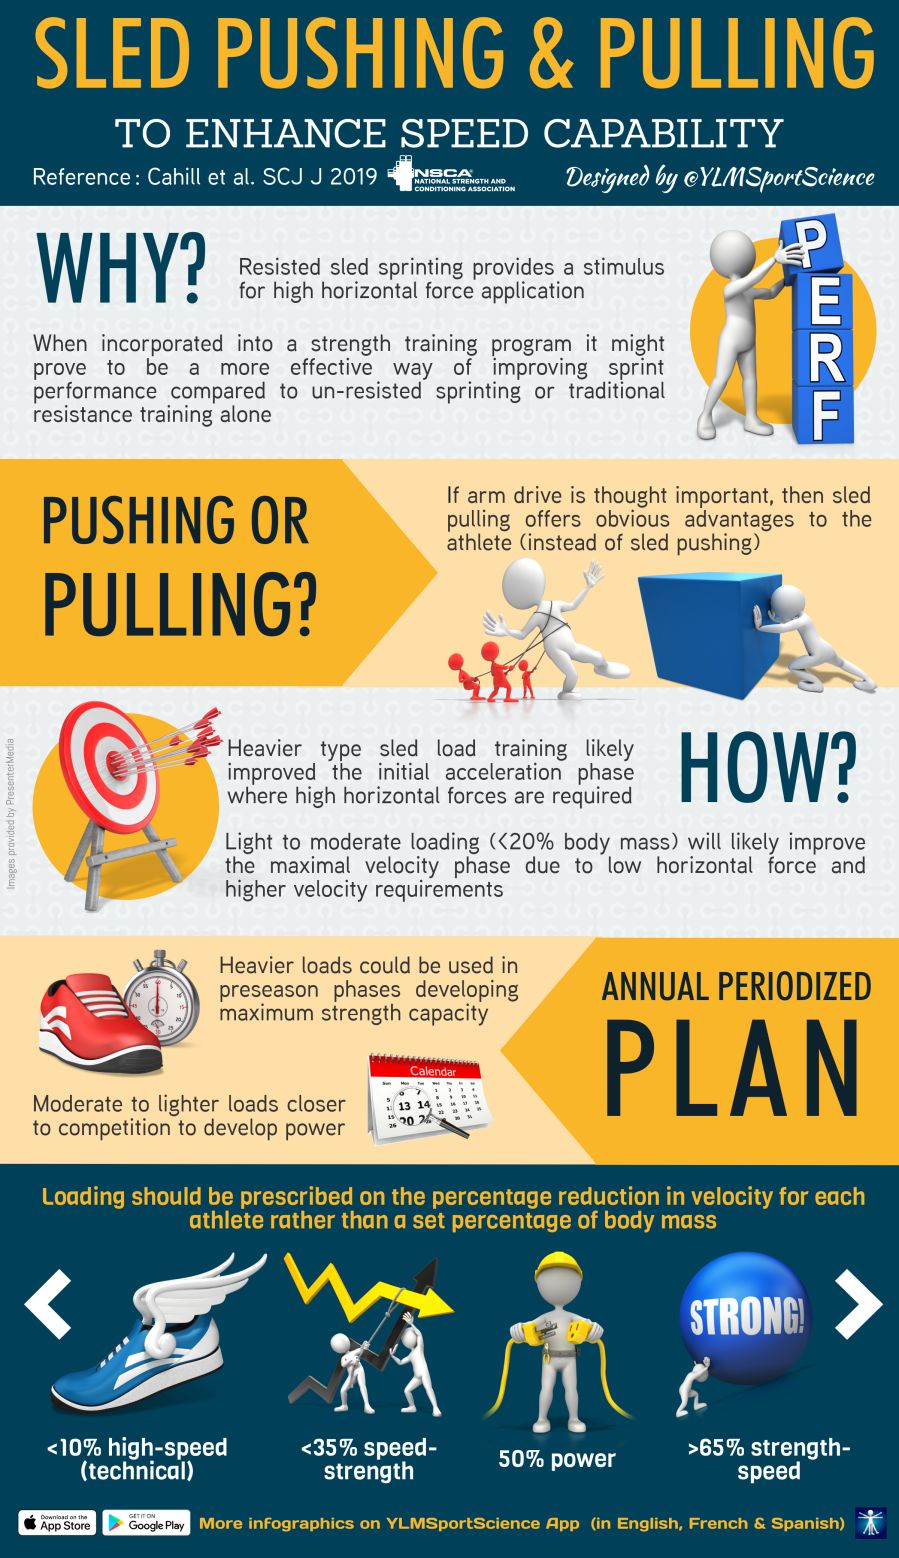 This infographic takes a look at resisted sled training and the benefits it may have on sprint performance. It also offers insight into when and how to utilize resisted sled training.